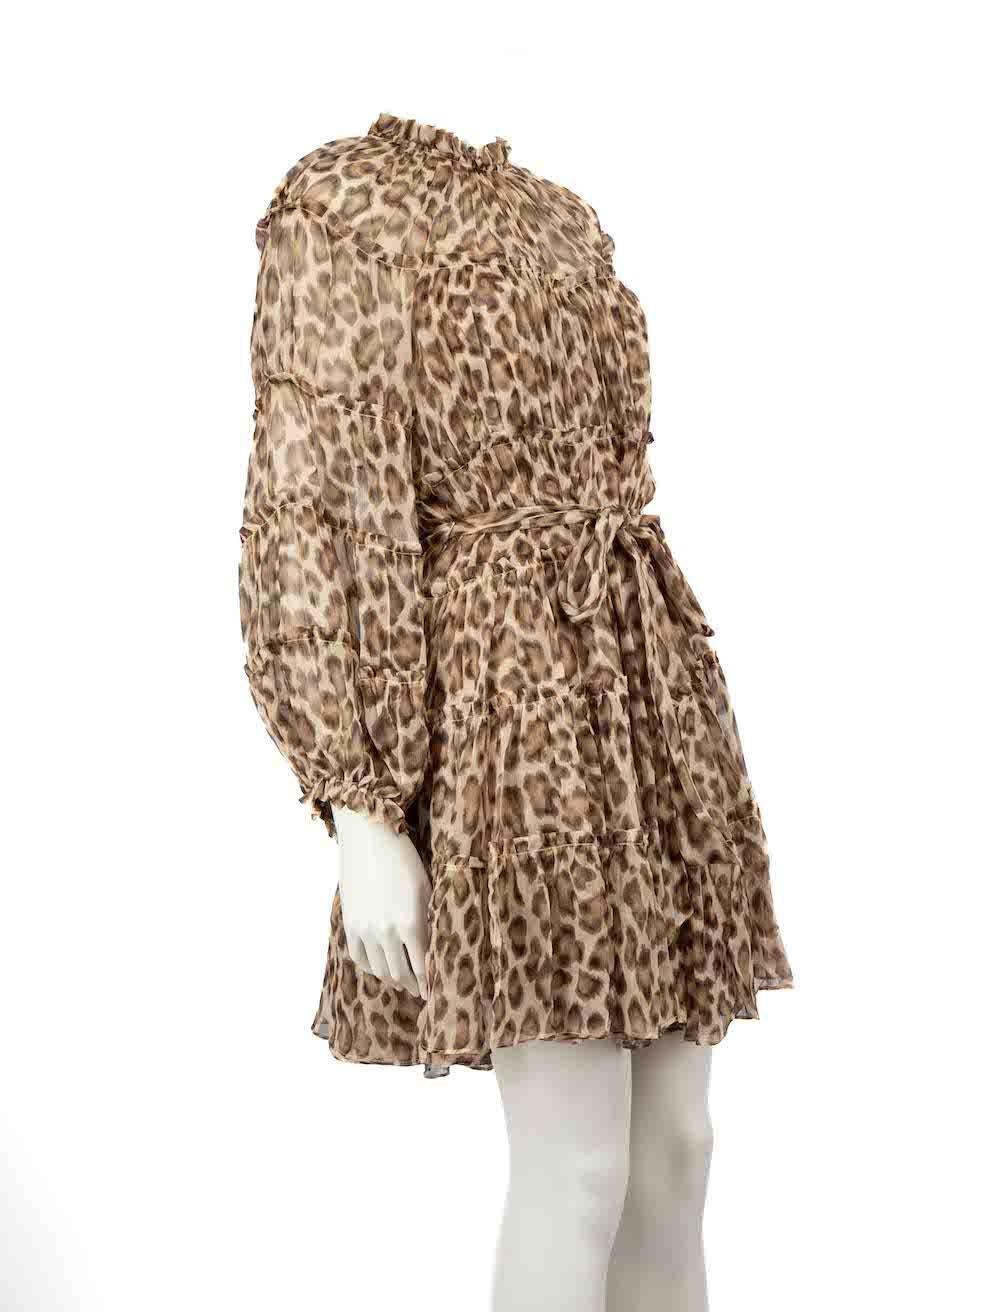 CONDITION is Very good. Hardly any visible wear to dress is evident on this used Zimmermann designer resale item.
 
 
 
 Details
 
 
 Brown
 
 
 Silk
 
 Dress
 
 Leopard print pattern
 
 Mini length
 
 Long puff sleeves
 
 Belt tie
 
 Round neck
 
